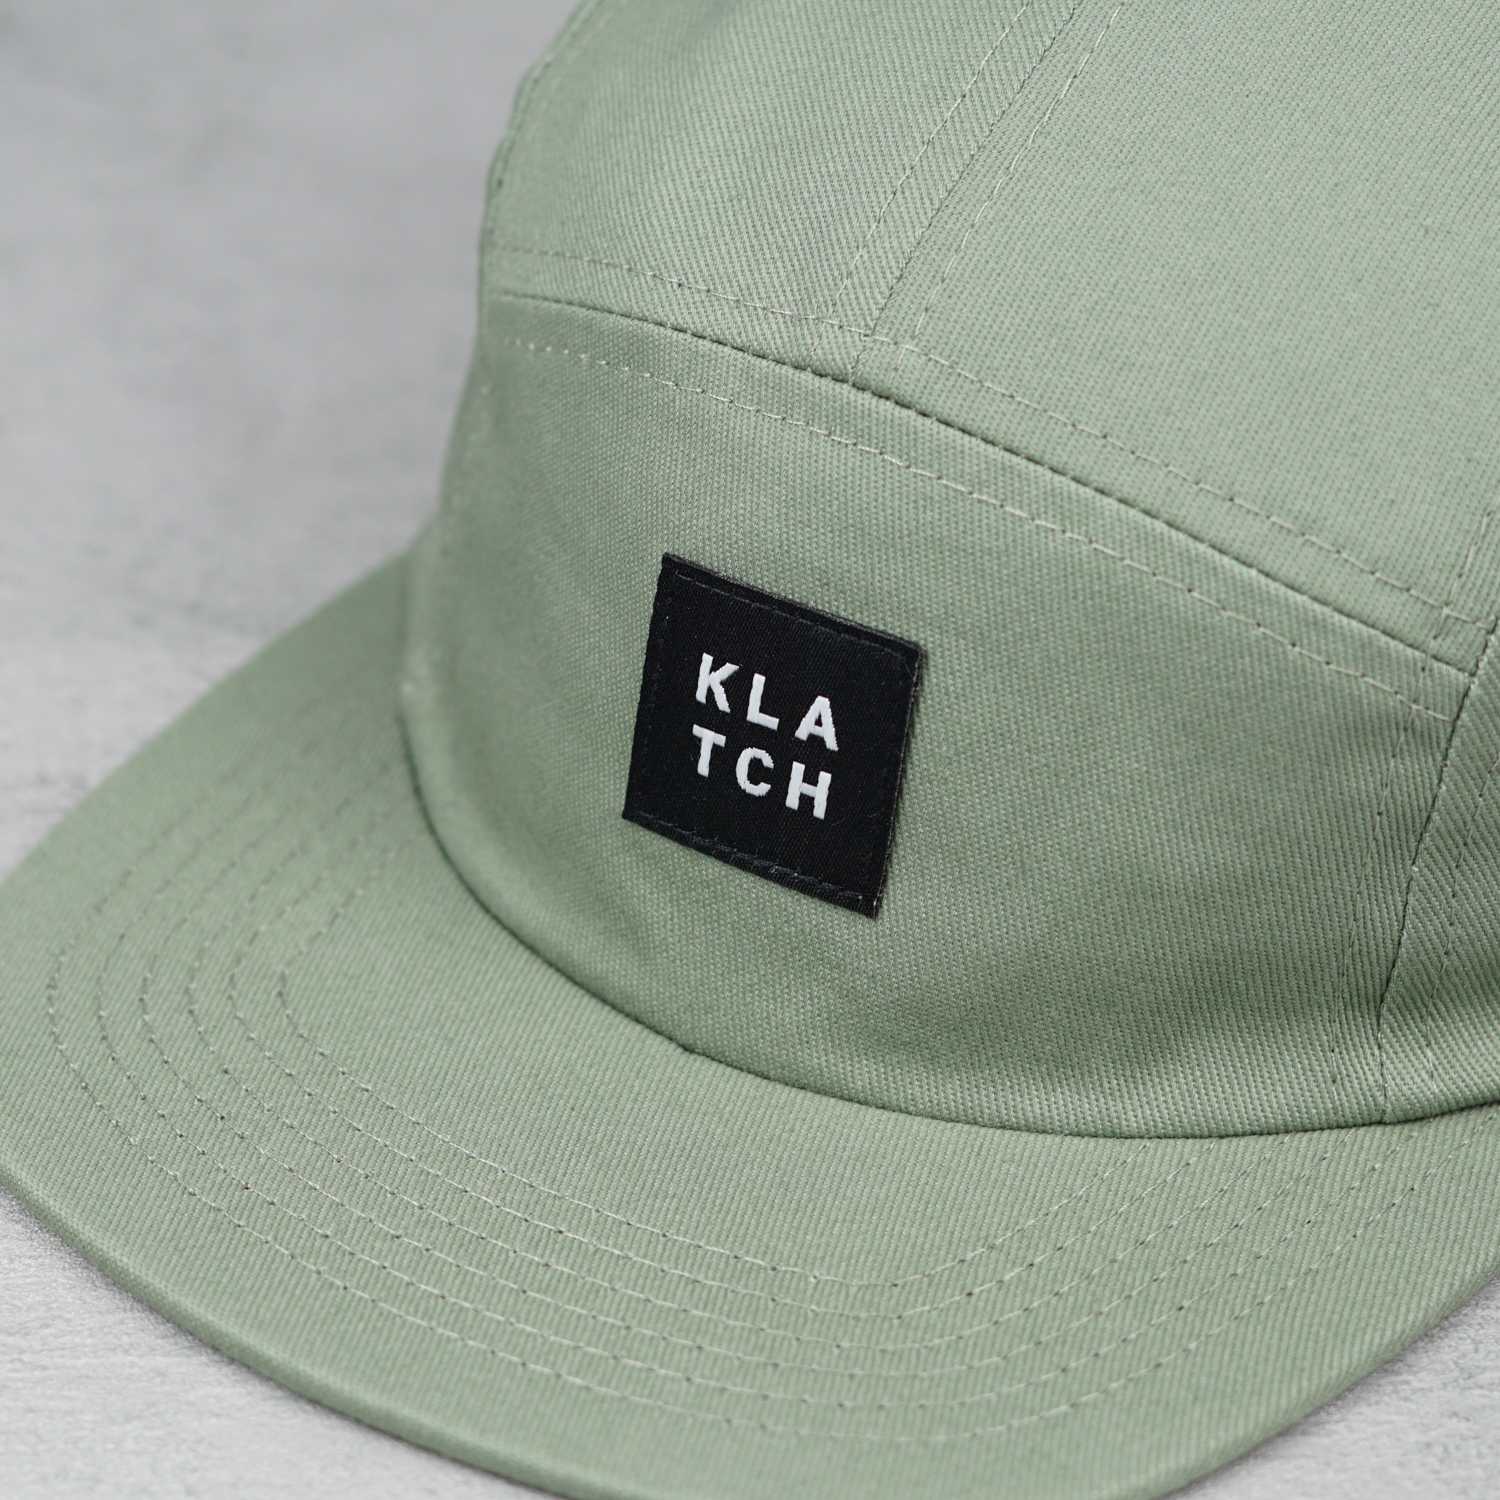 woven label on green five panel hat